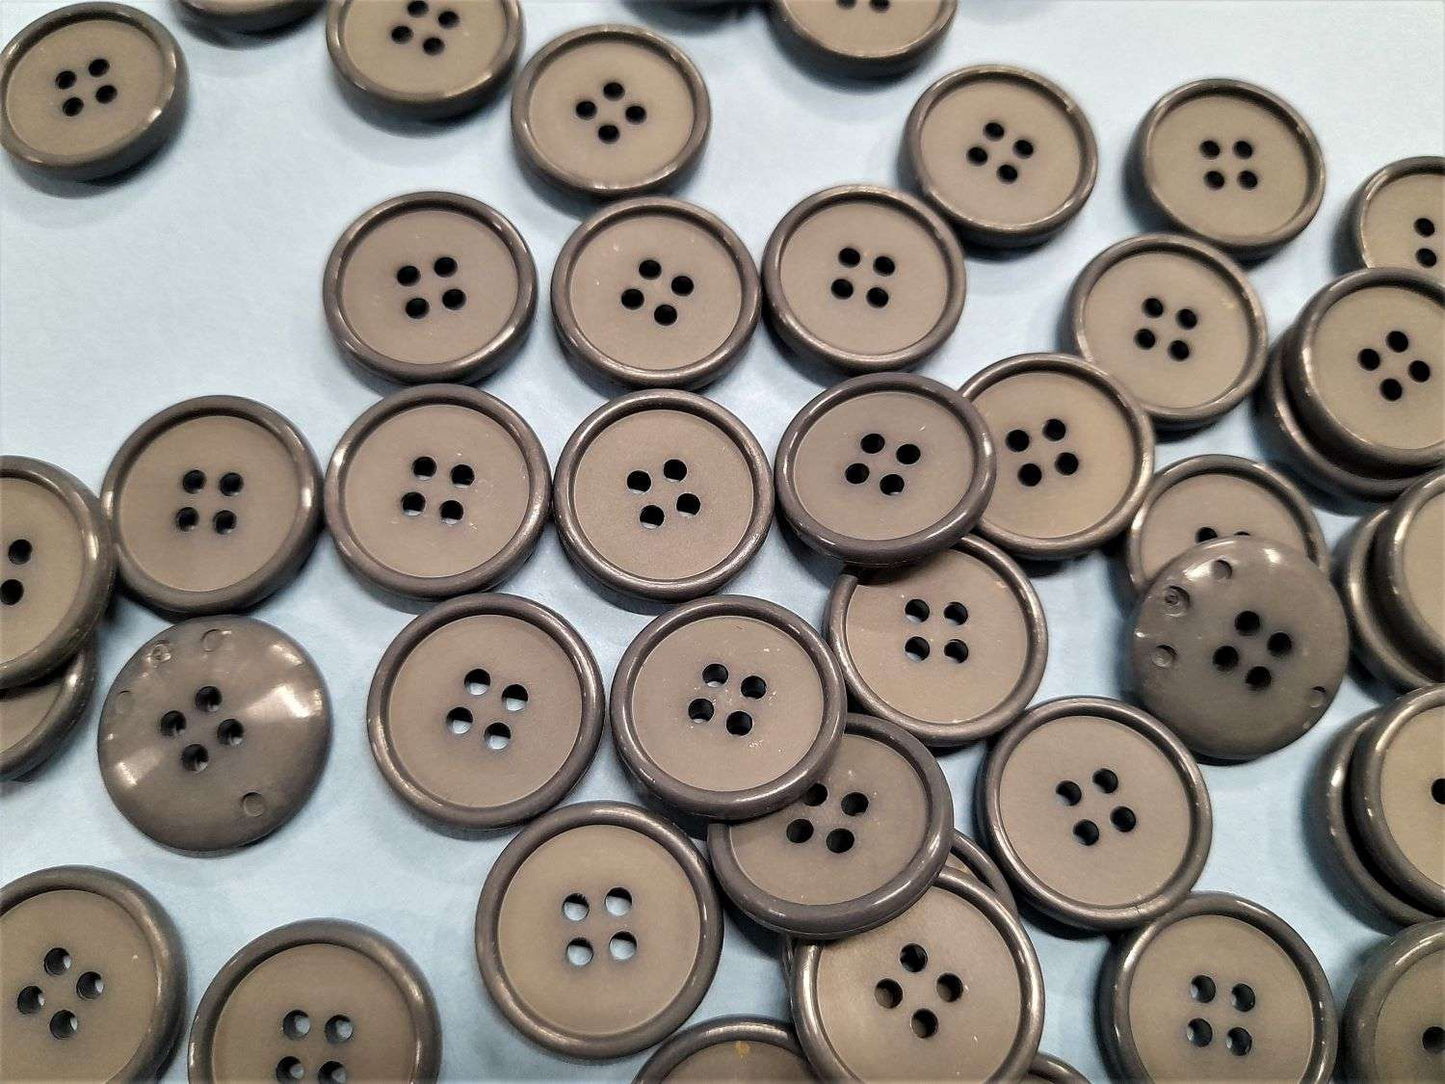 50 grey 4 hole buttons size 20mm clearance